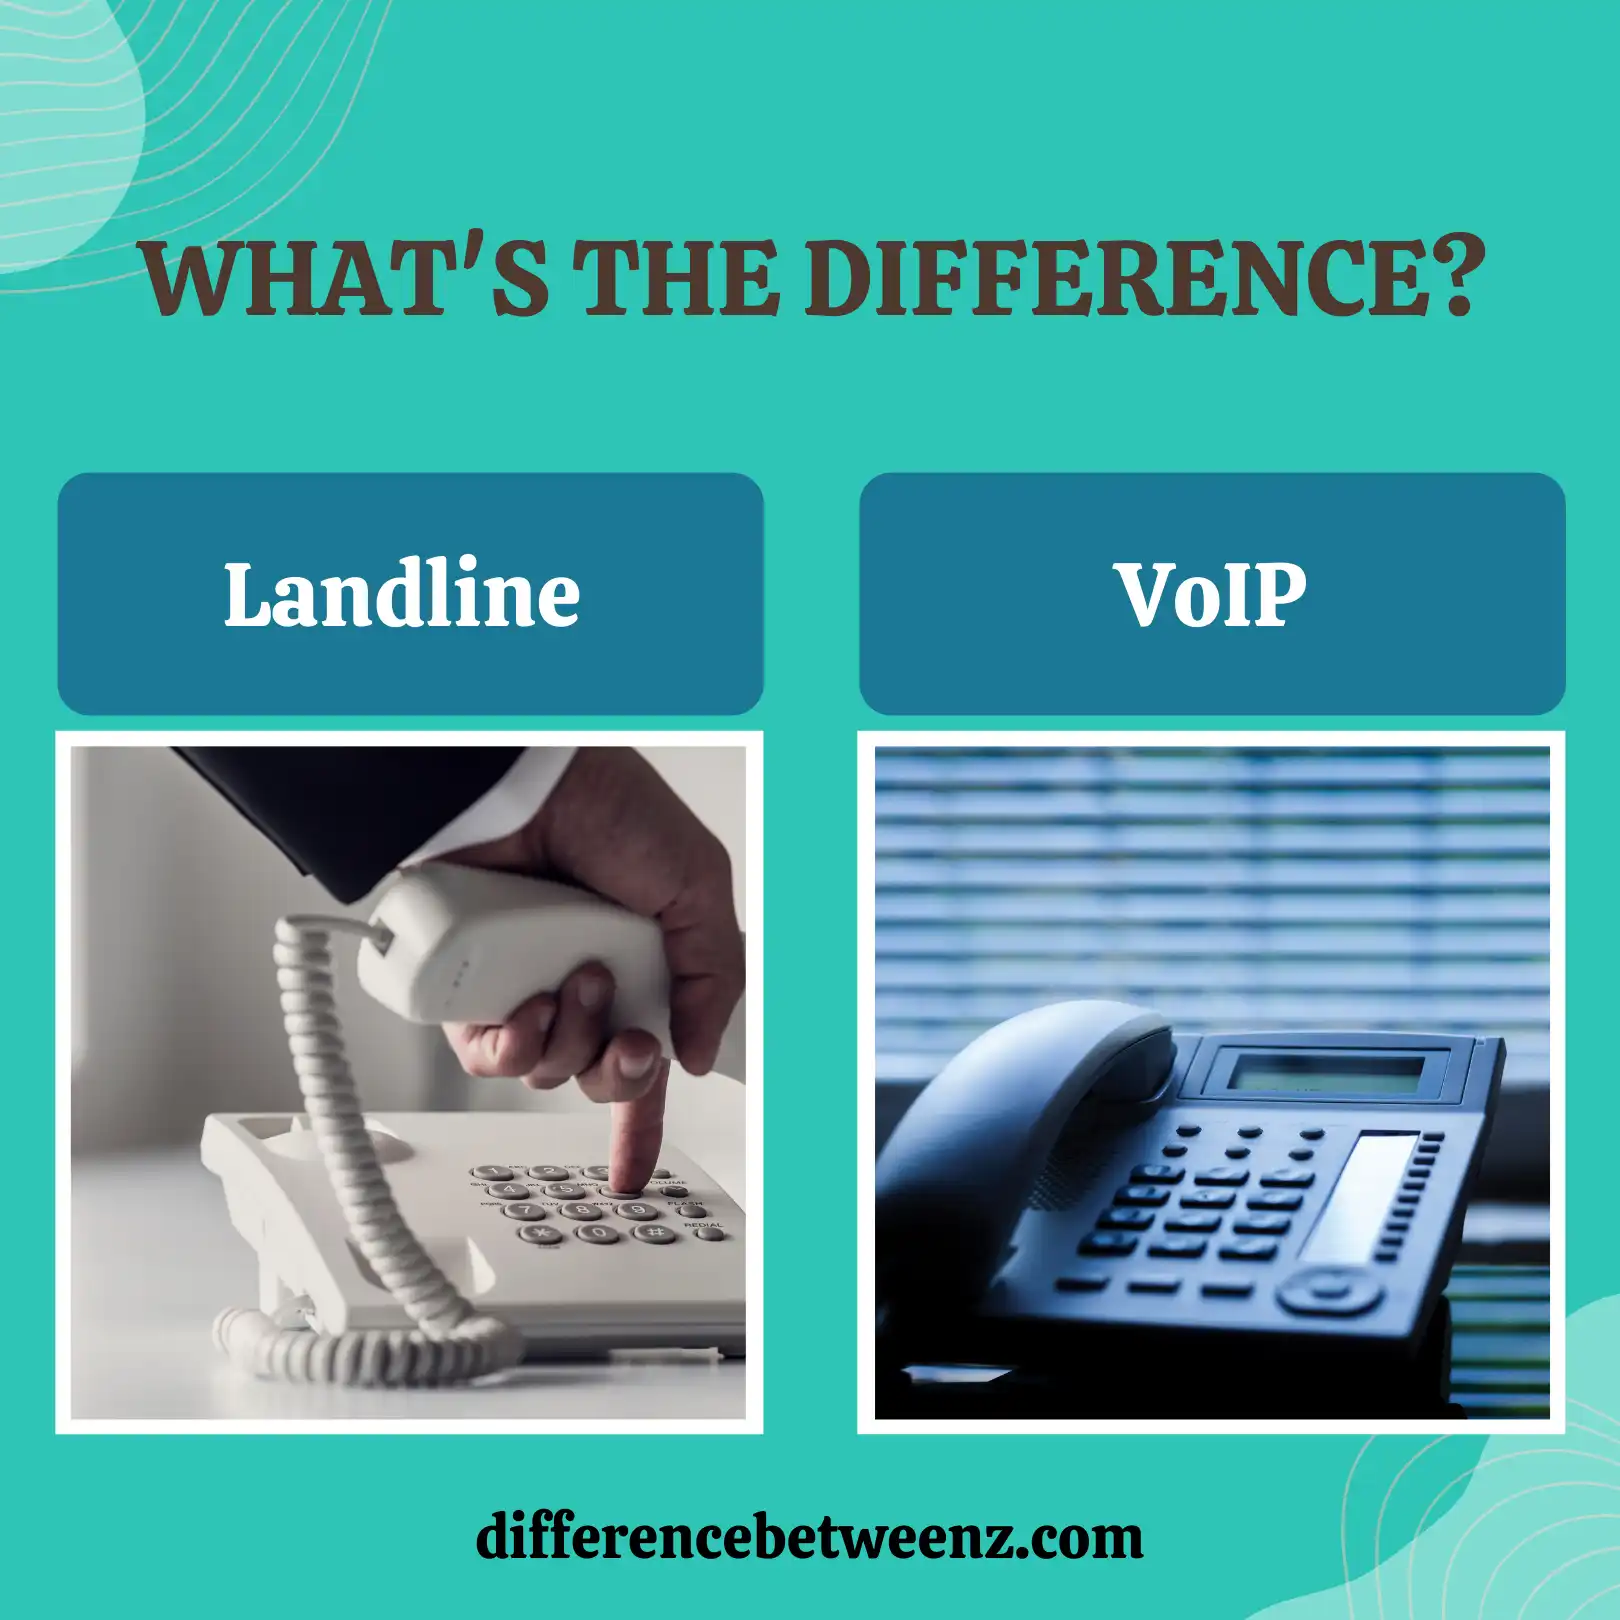 Difference between Landline and VoIP